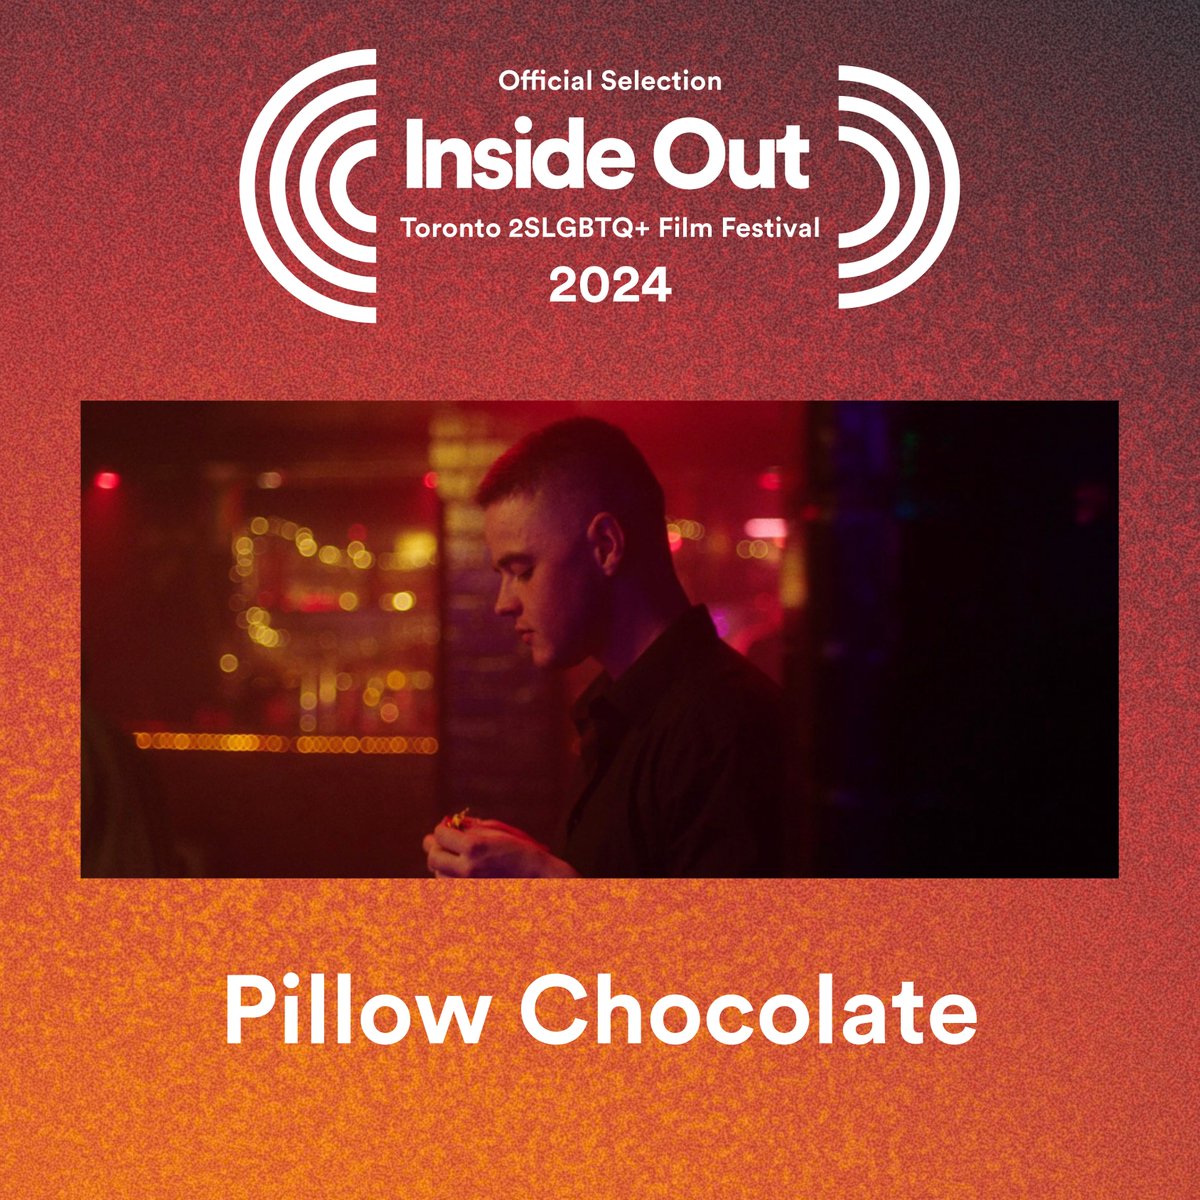 🍫🇨🇦 Pillow Chocolate is off to Canada! Delighted to share that Pillow Chocolate is part of the F*ck the Pain Away shorts strand at @InsideOutTO! Couldn’t be more excited for the film to be playing at the TIFF Lightbox at the end of the month insideout.ca/toronto-films/…